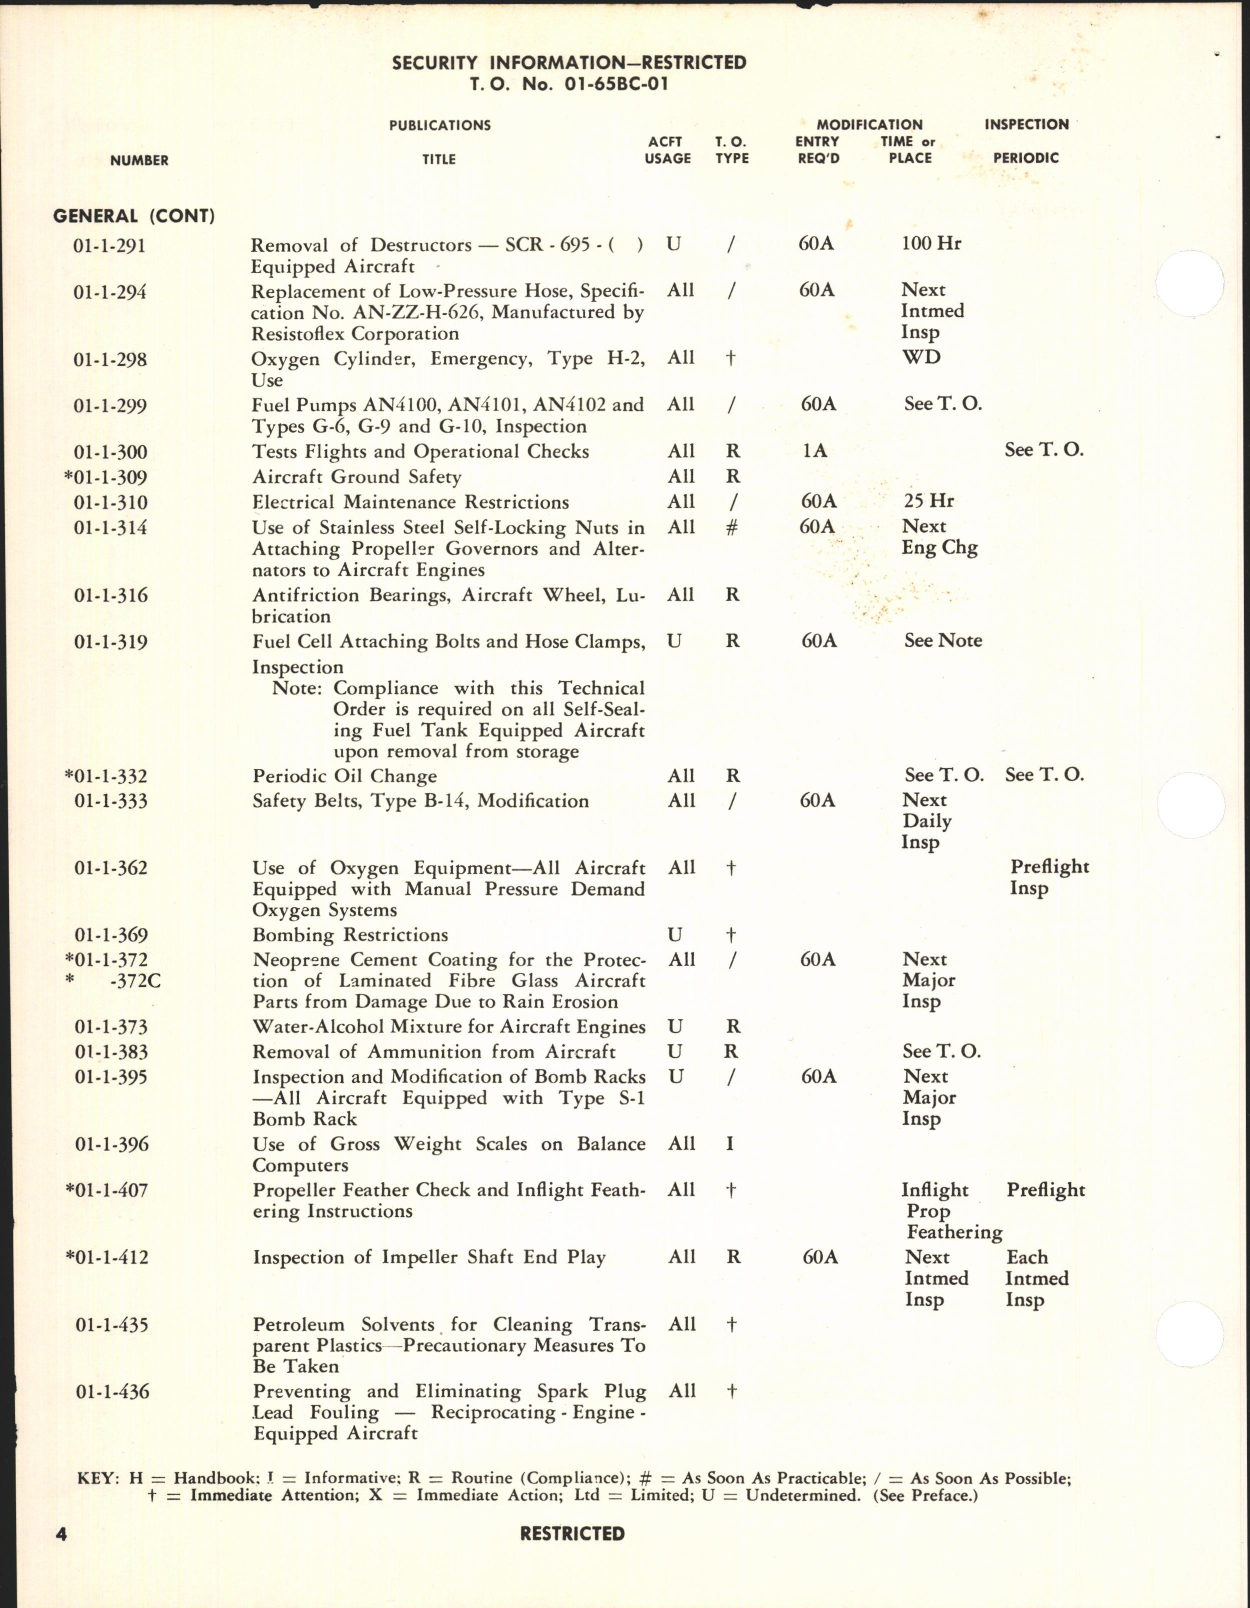 Sample page 8 from AirCorps Library document: List of Applicable Publications for the F-47D (Aircraft & Equipment)